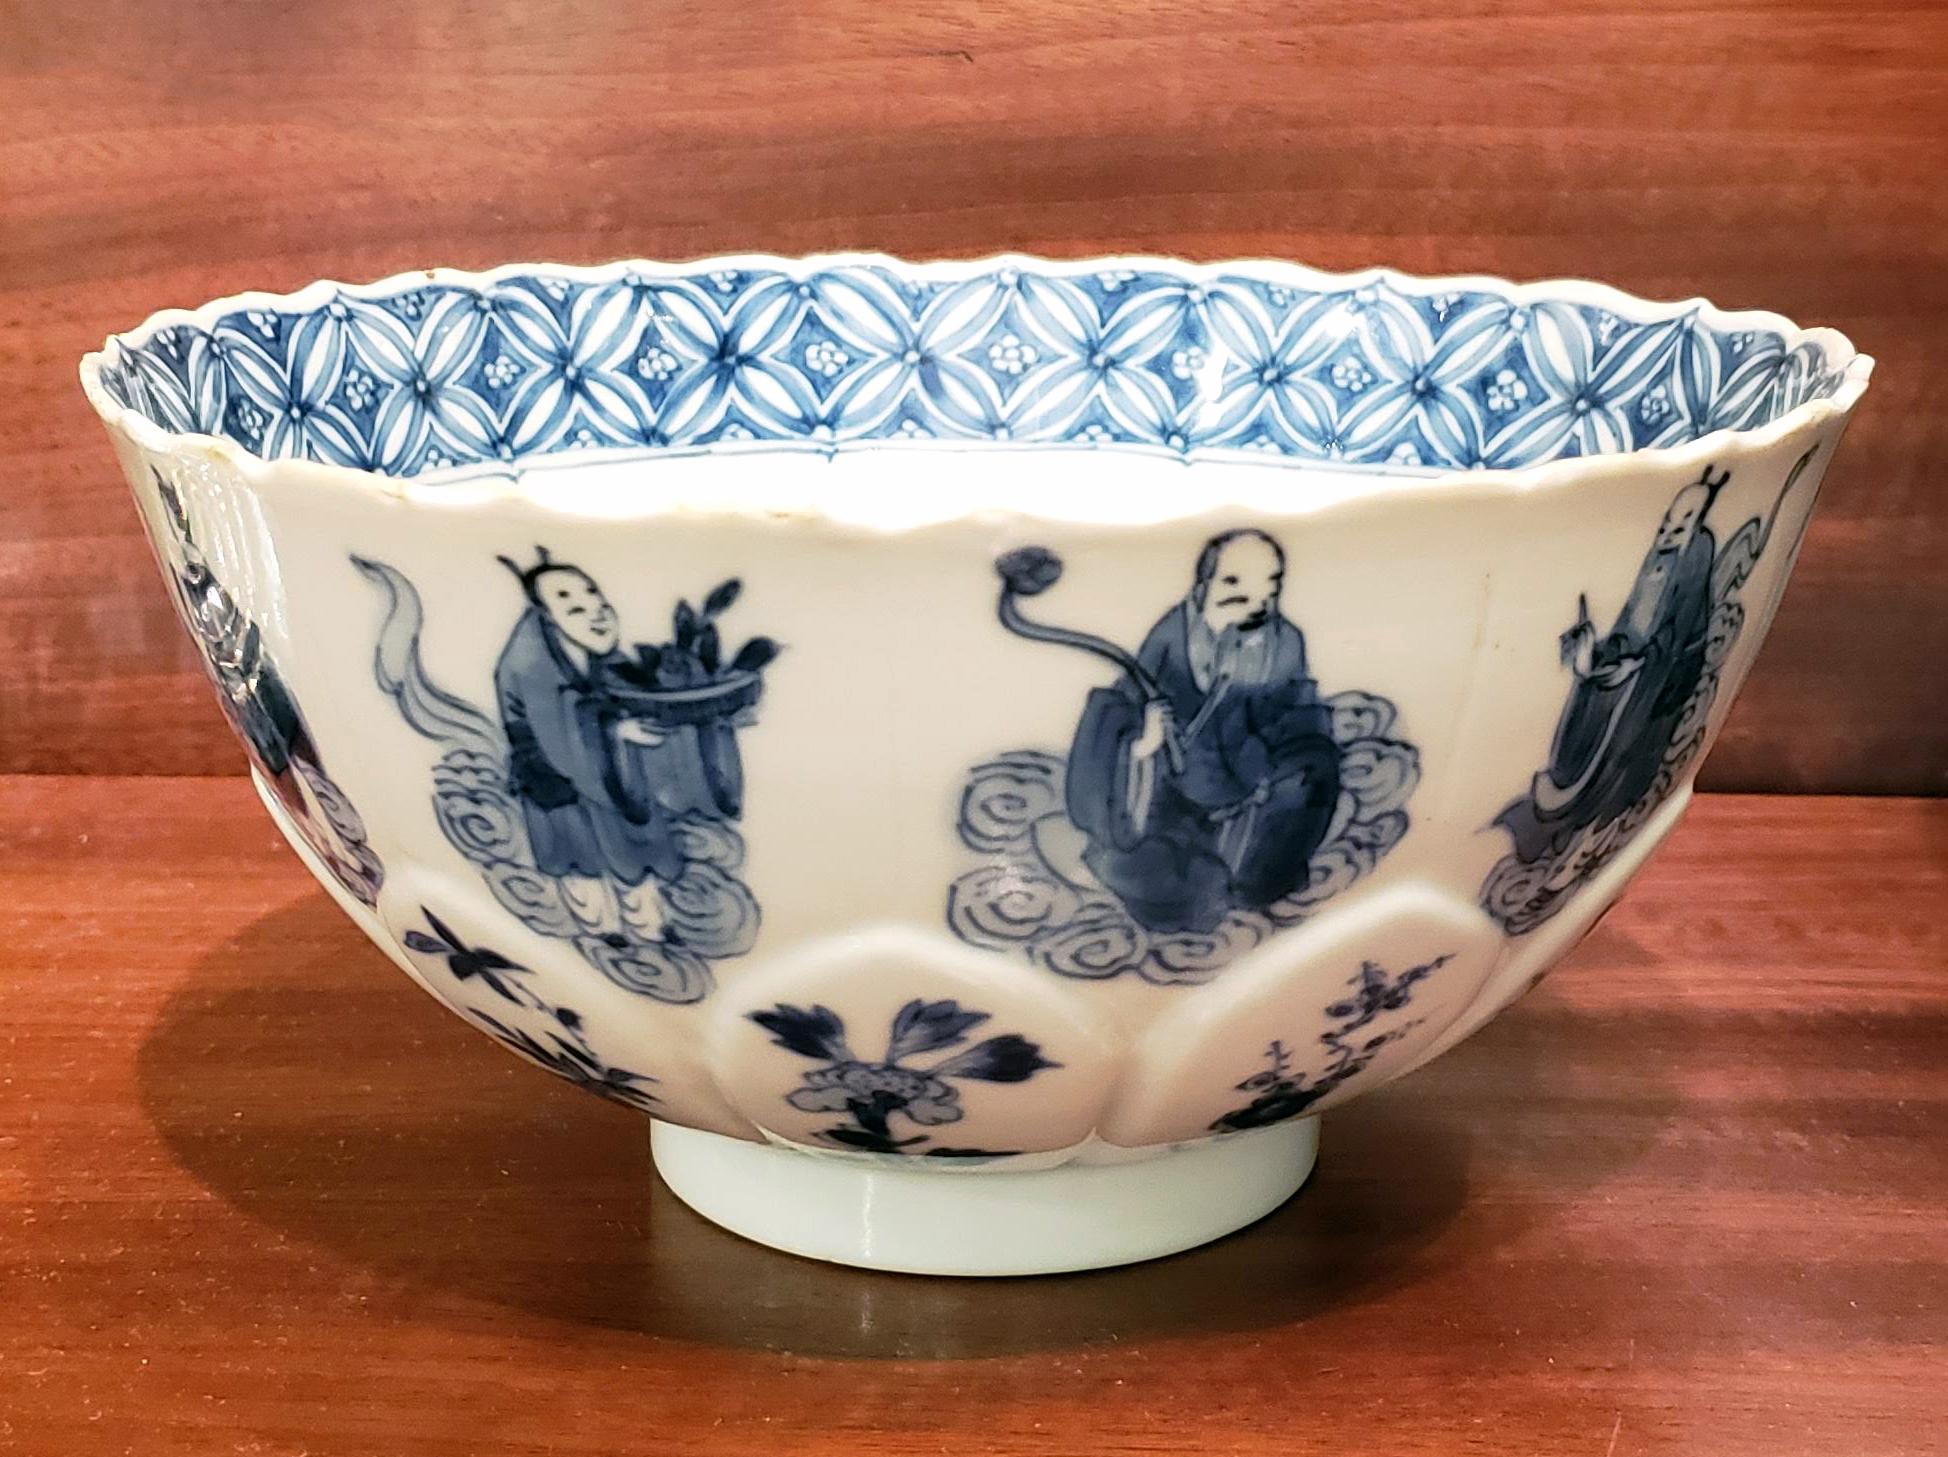 Kangxi Period Chinese Blue and White Porcelain Bowl, The Immortals & Four Gods 1